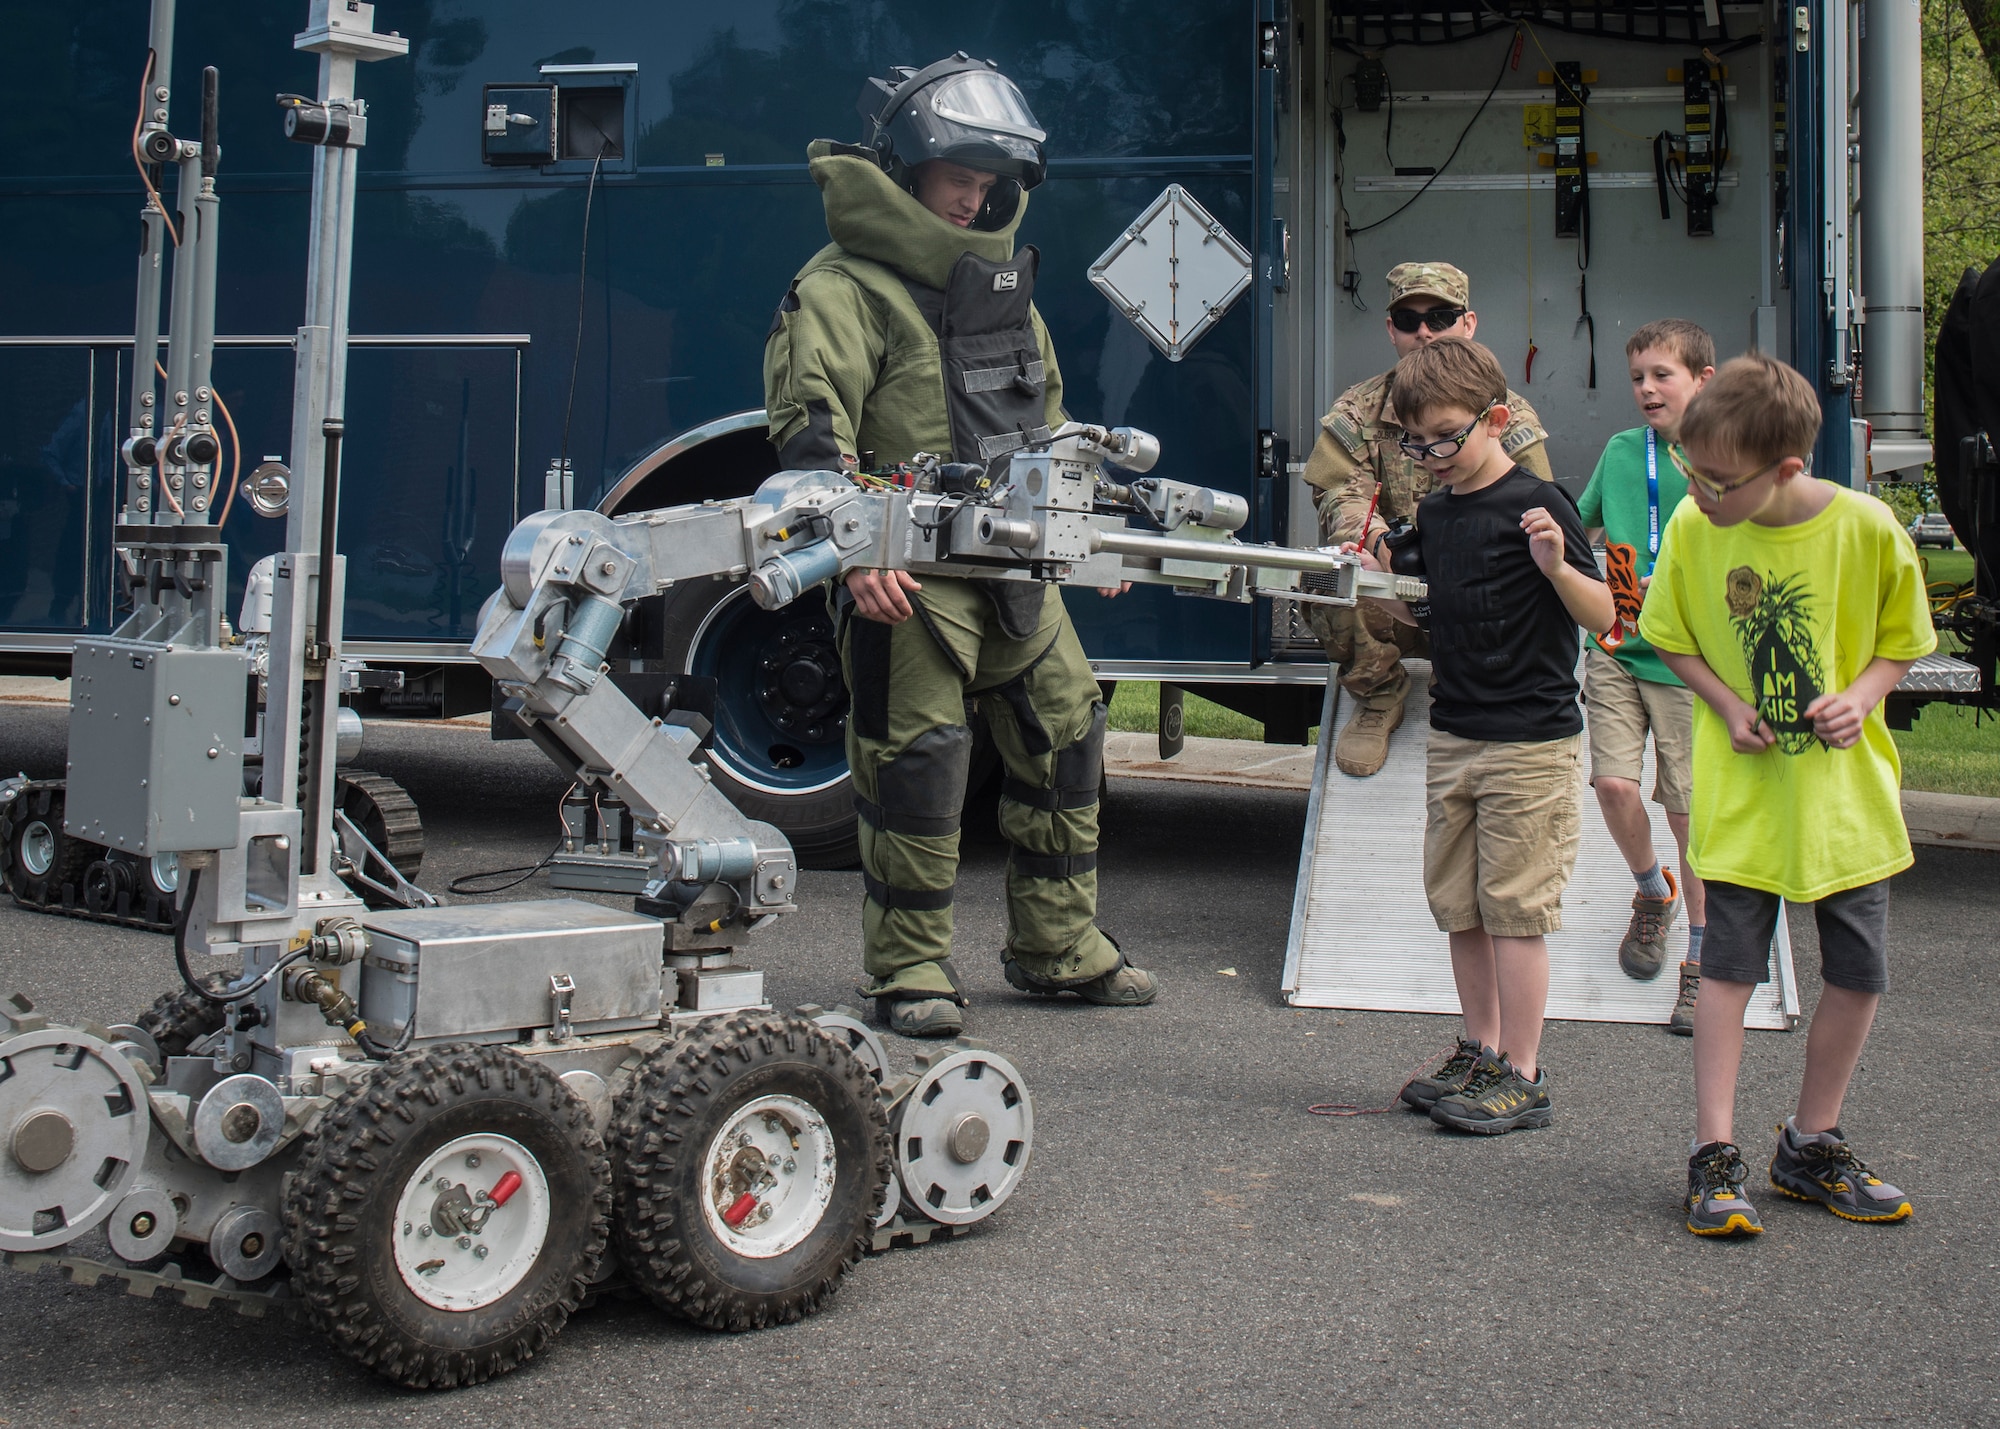 Airman 1st Class Kyle Riley, 92nd Civil Engineer Squadron Explosive Ordnance Disposal apprentice, shows Michael Anderson Elementary student’s EOD tools during the National Police Week Law Enforcement Exposition at Fairchild Air Force Base, Washington, on May 16, 2018. The 92nd CES EOD, military working dogs and the Spokane Police Department provided children with hands-on demonstrations.